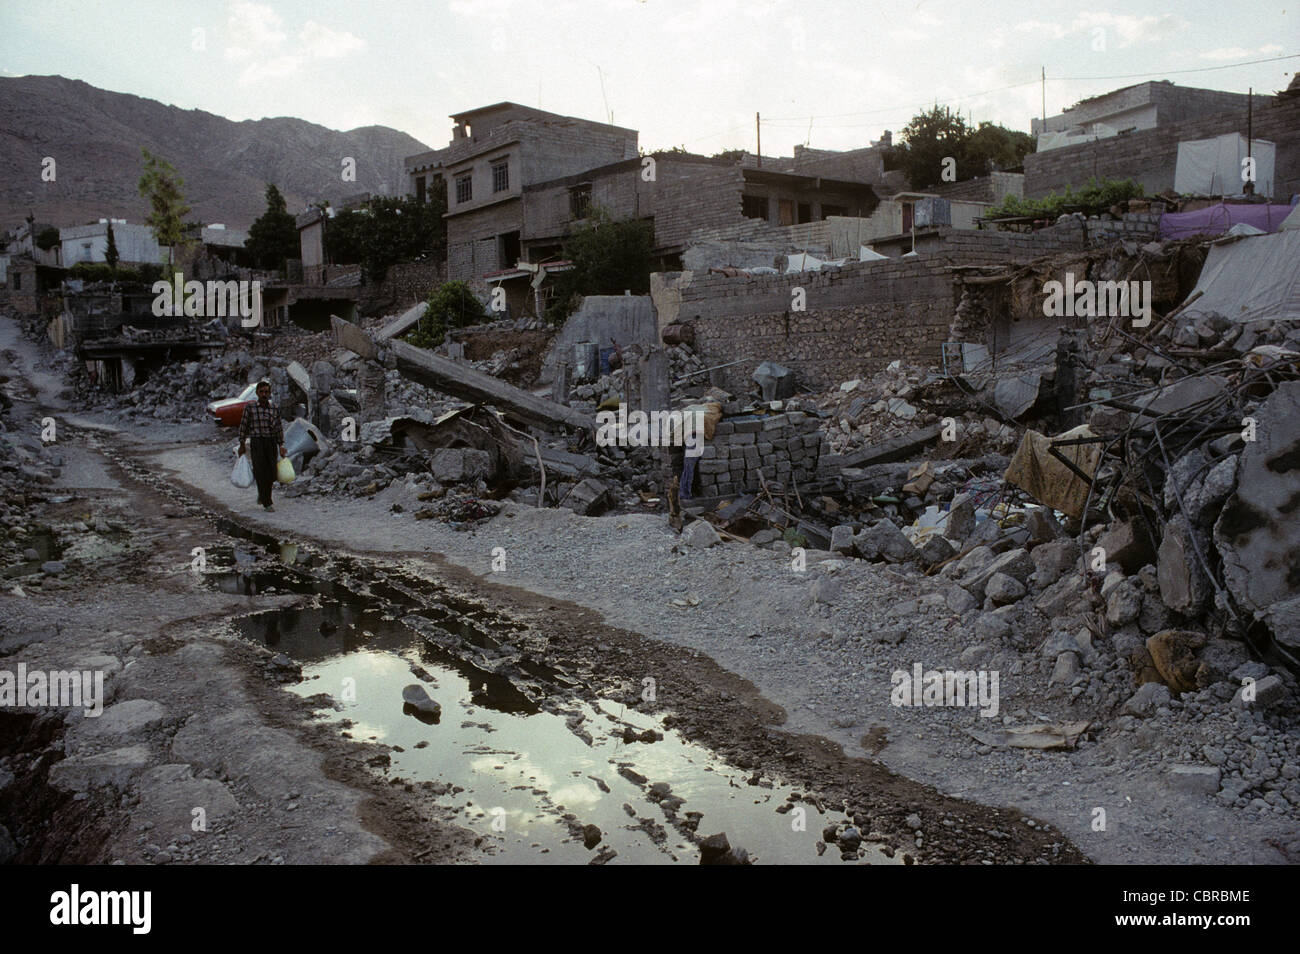 Kurdish city of Dohuk after fighting between Kurds and Saddam Hussein's army with bomb damage and burst water pies, sewage. Stock Photo